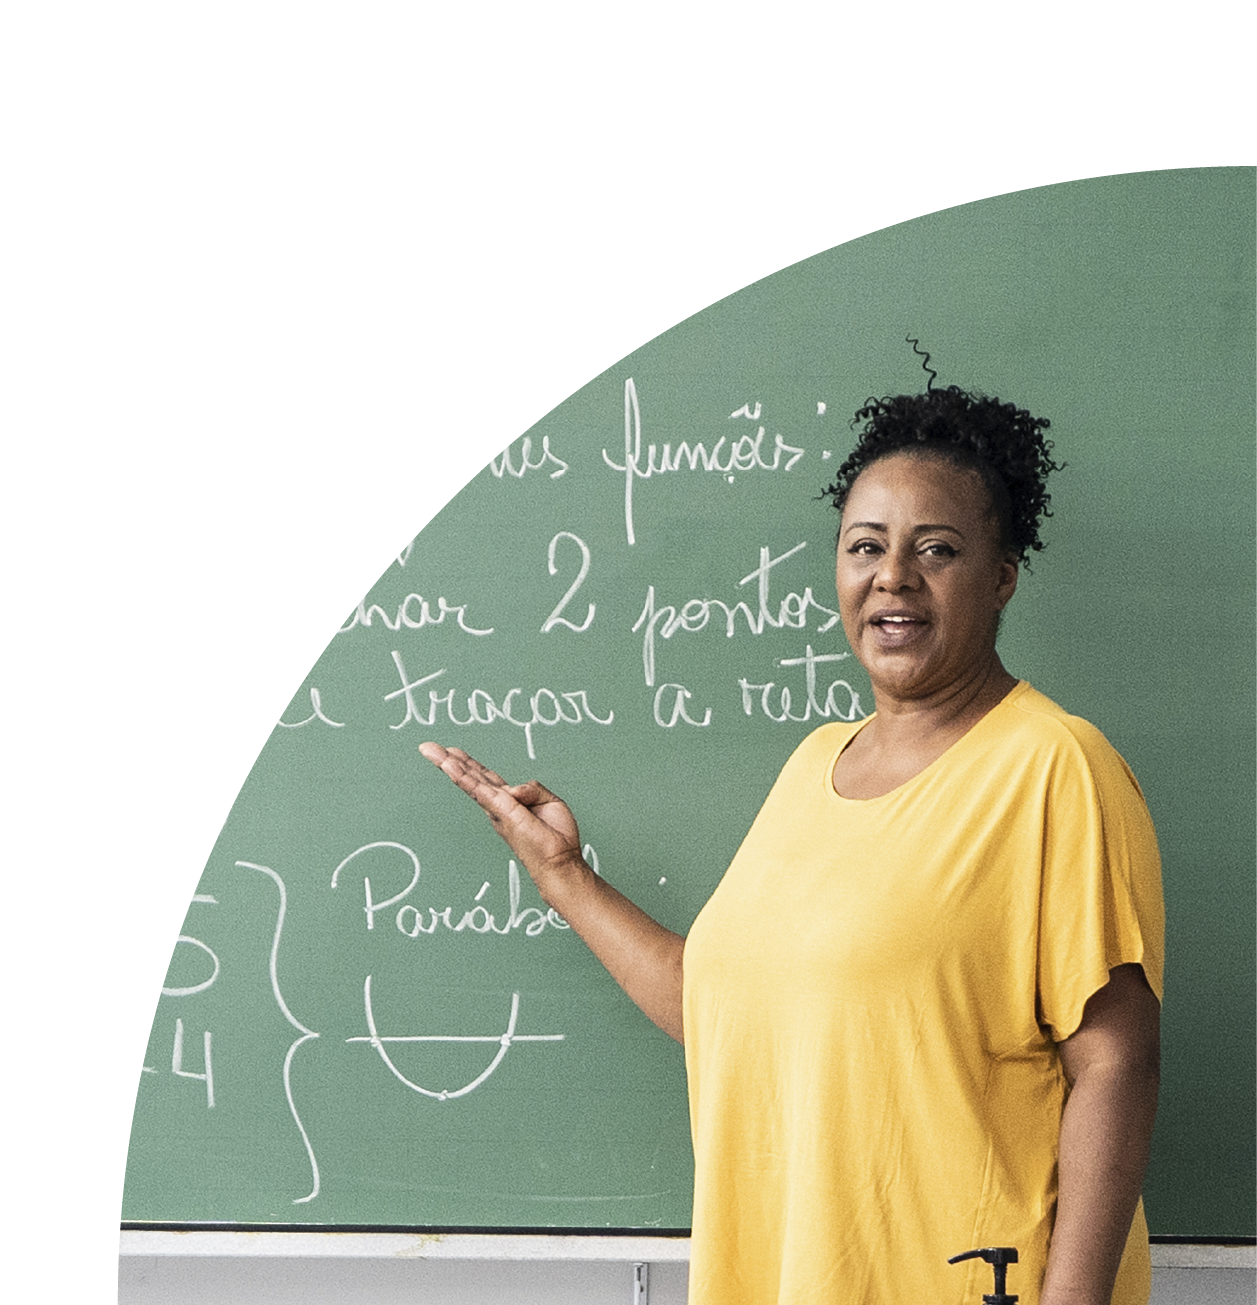 Half circle image of a woman in front of a green board with chalk